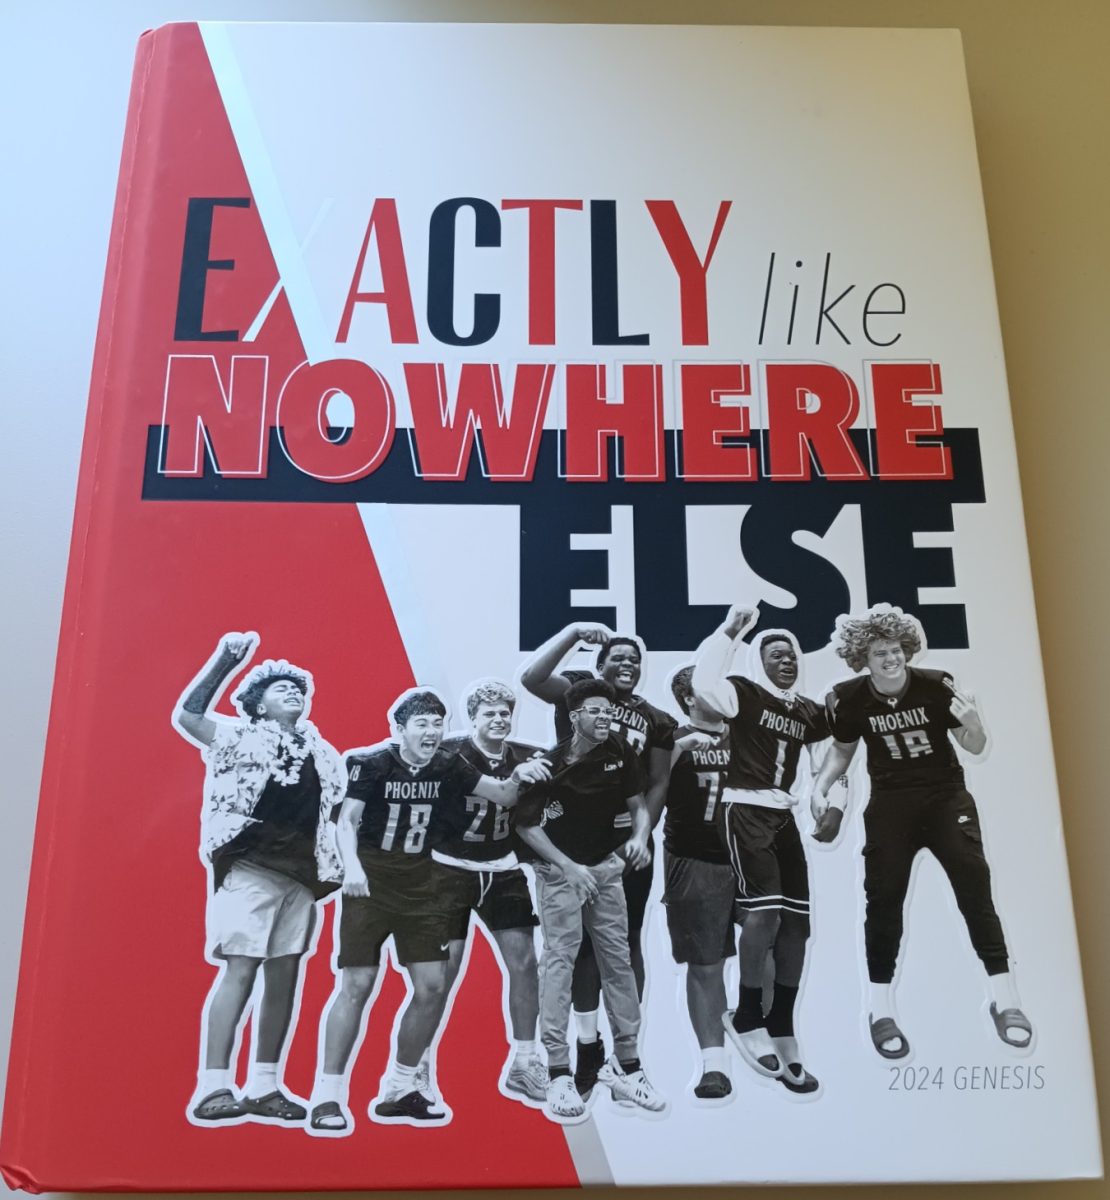 Once the yearbook came out, students got the chance to pay for it online and pick it up at the concession stand, or  bring money and pay for it at the concession stand during the lunch block.
